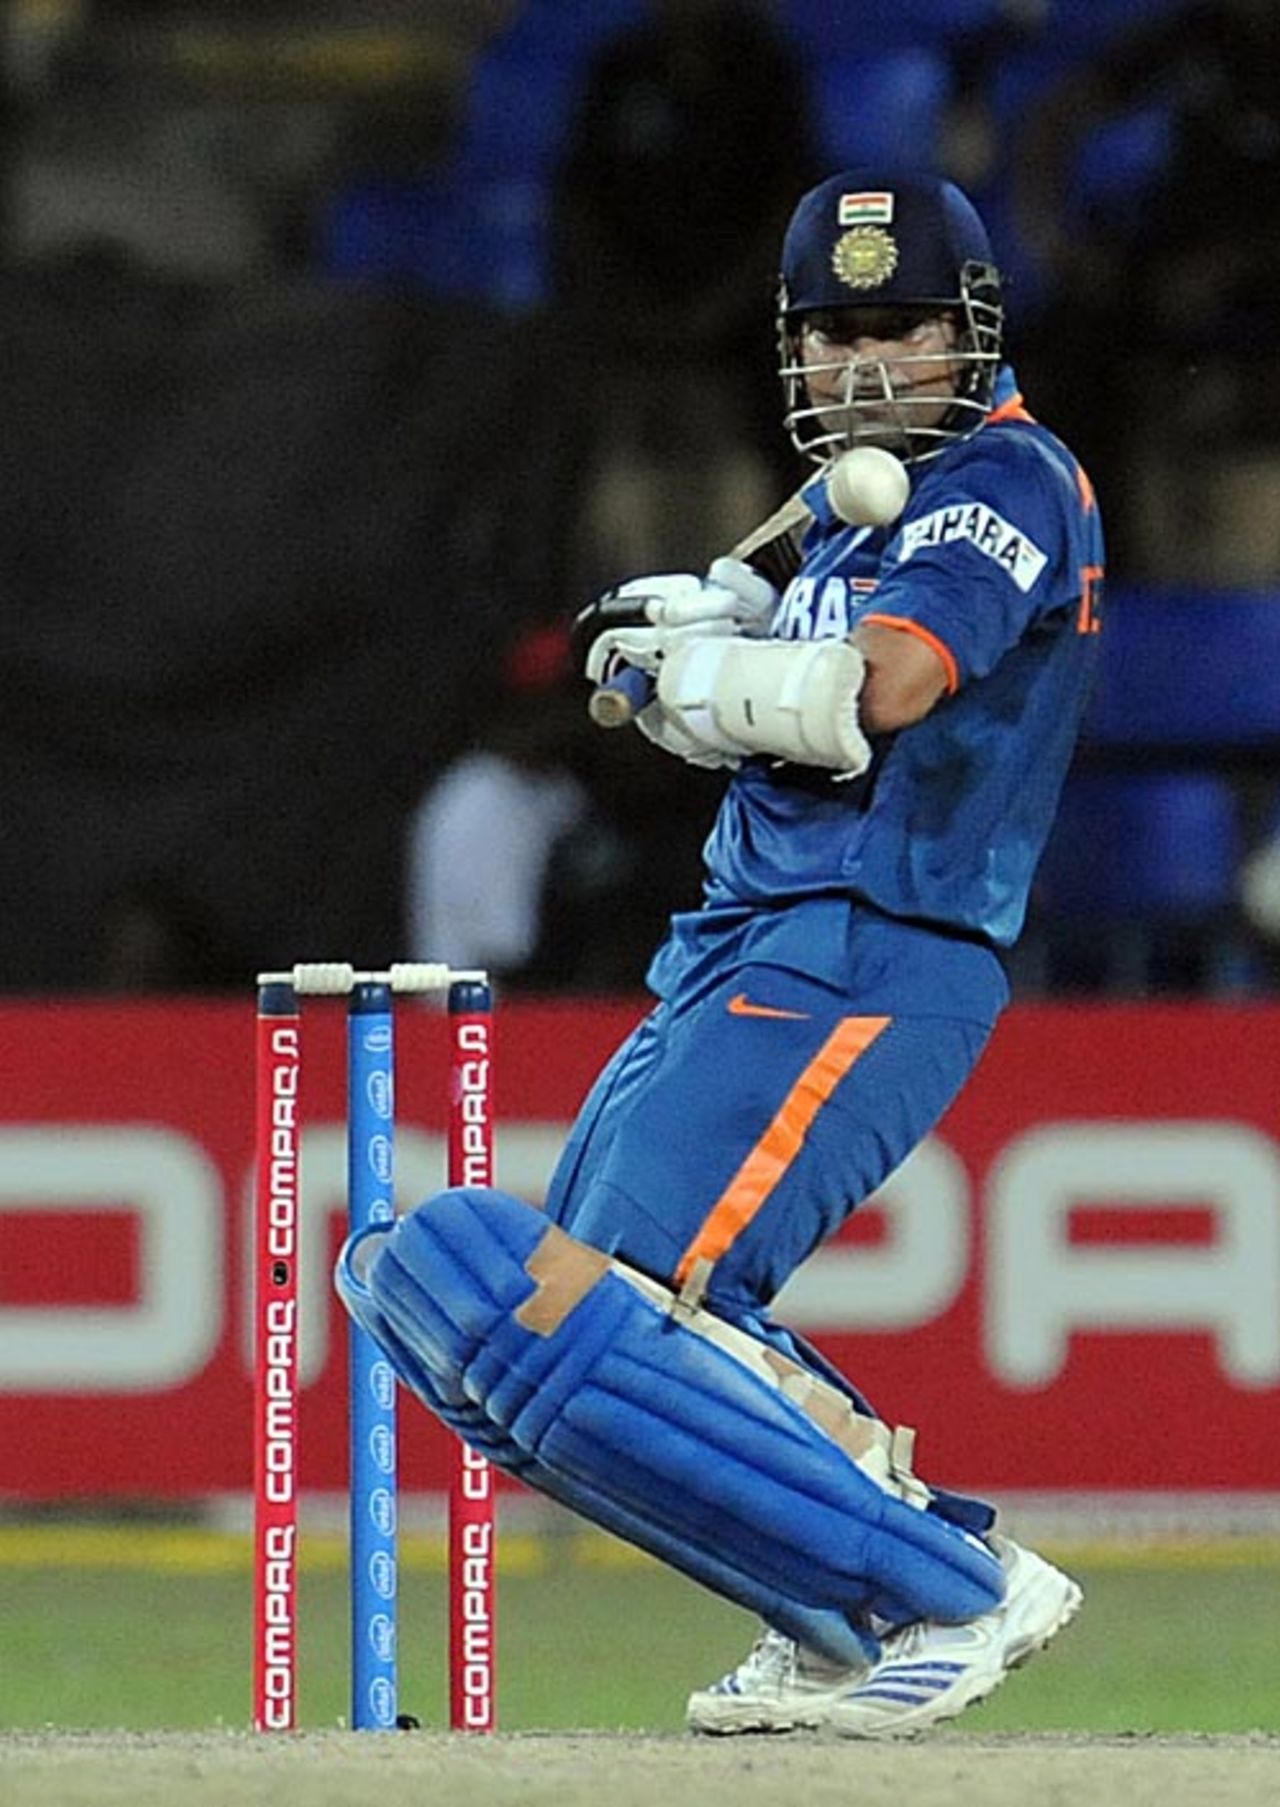 Sachin Tendulkar gets ready to nudge one past the keeper, India v New Zealand, 2nd match, Compaq Cup, Colombo, September 11, 2009